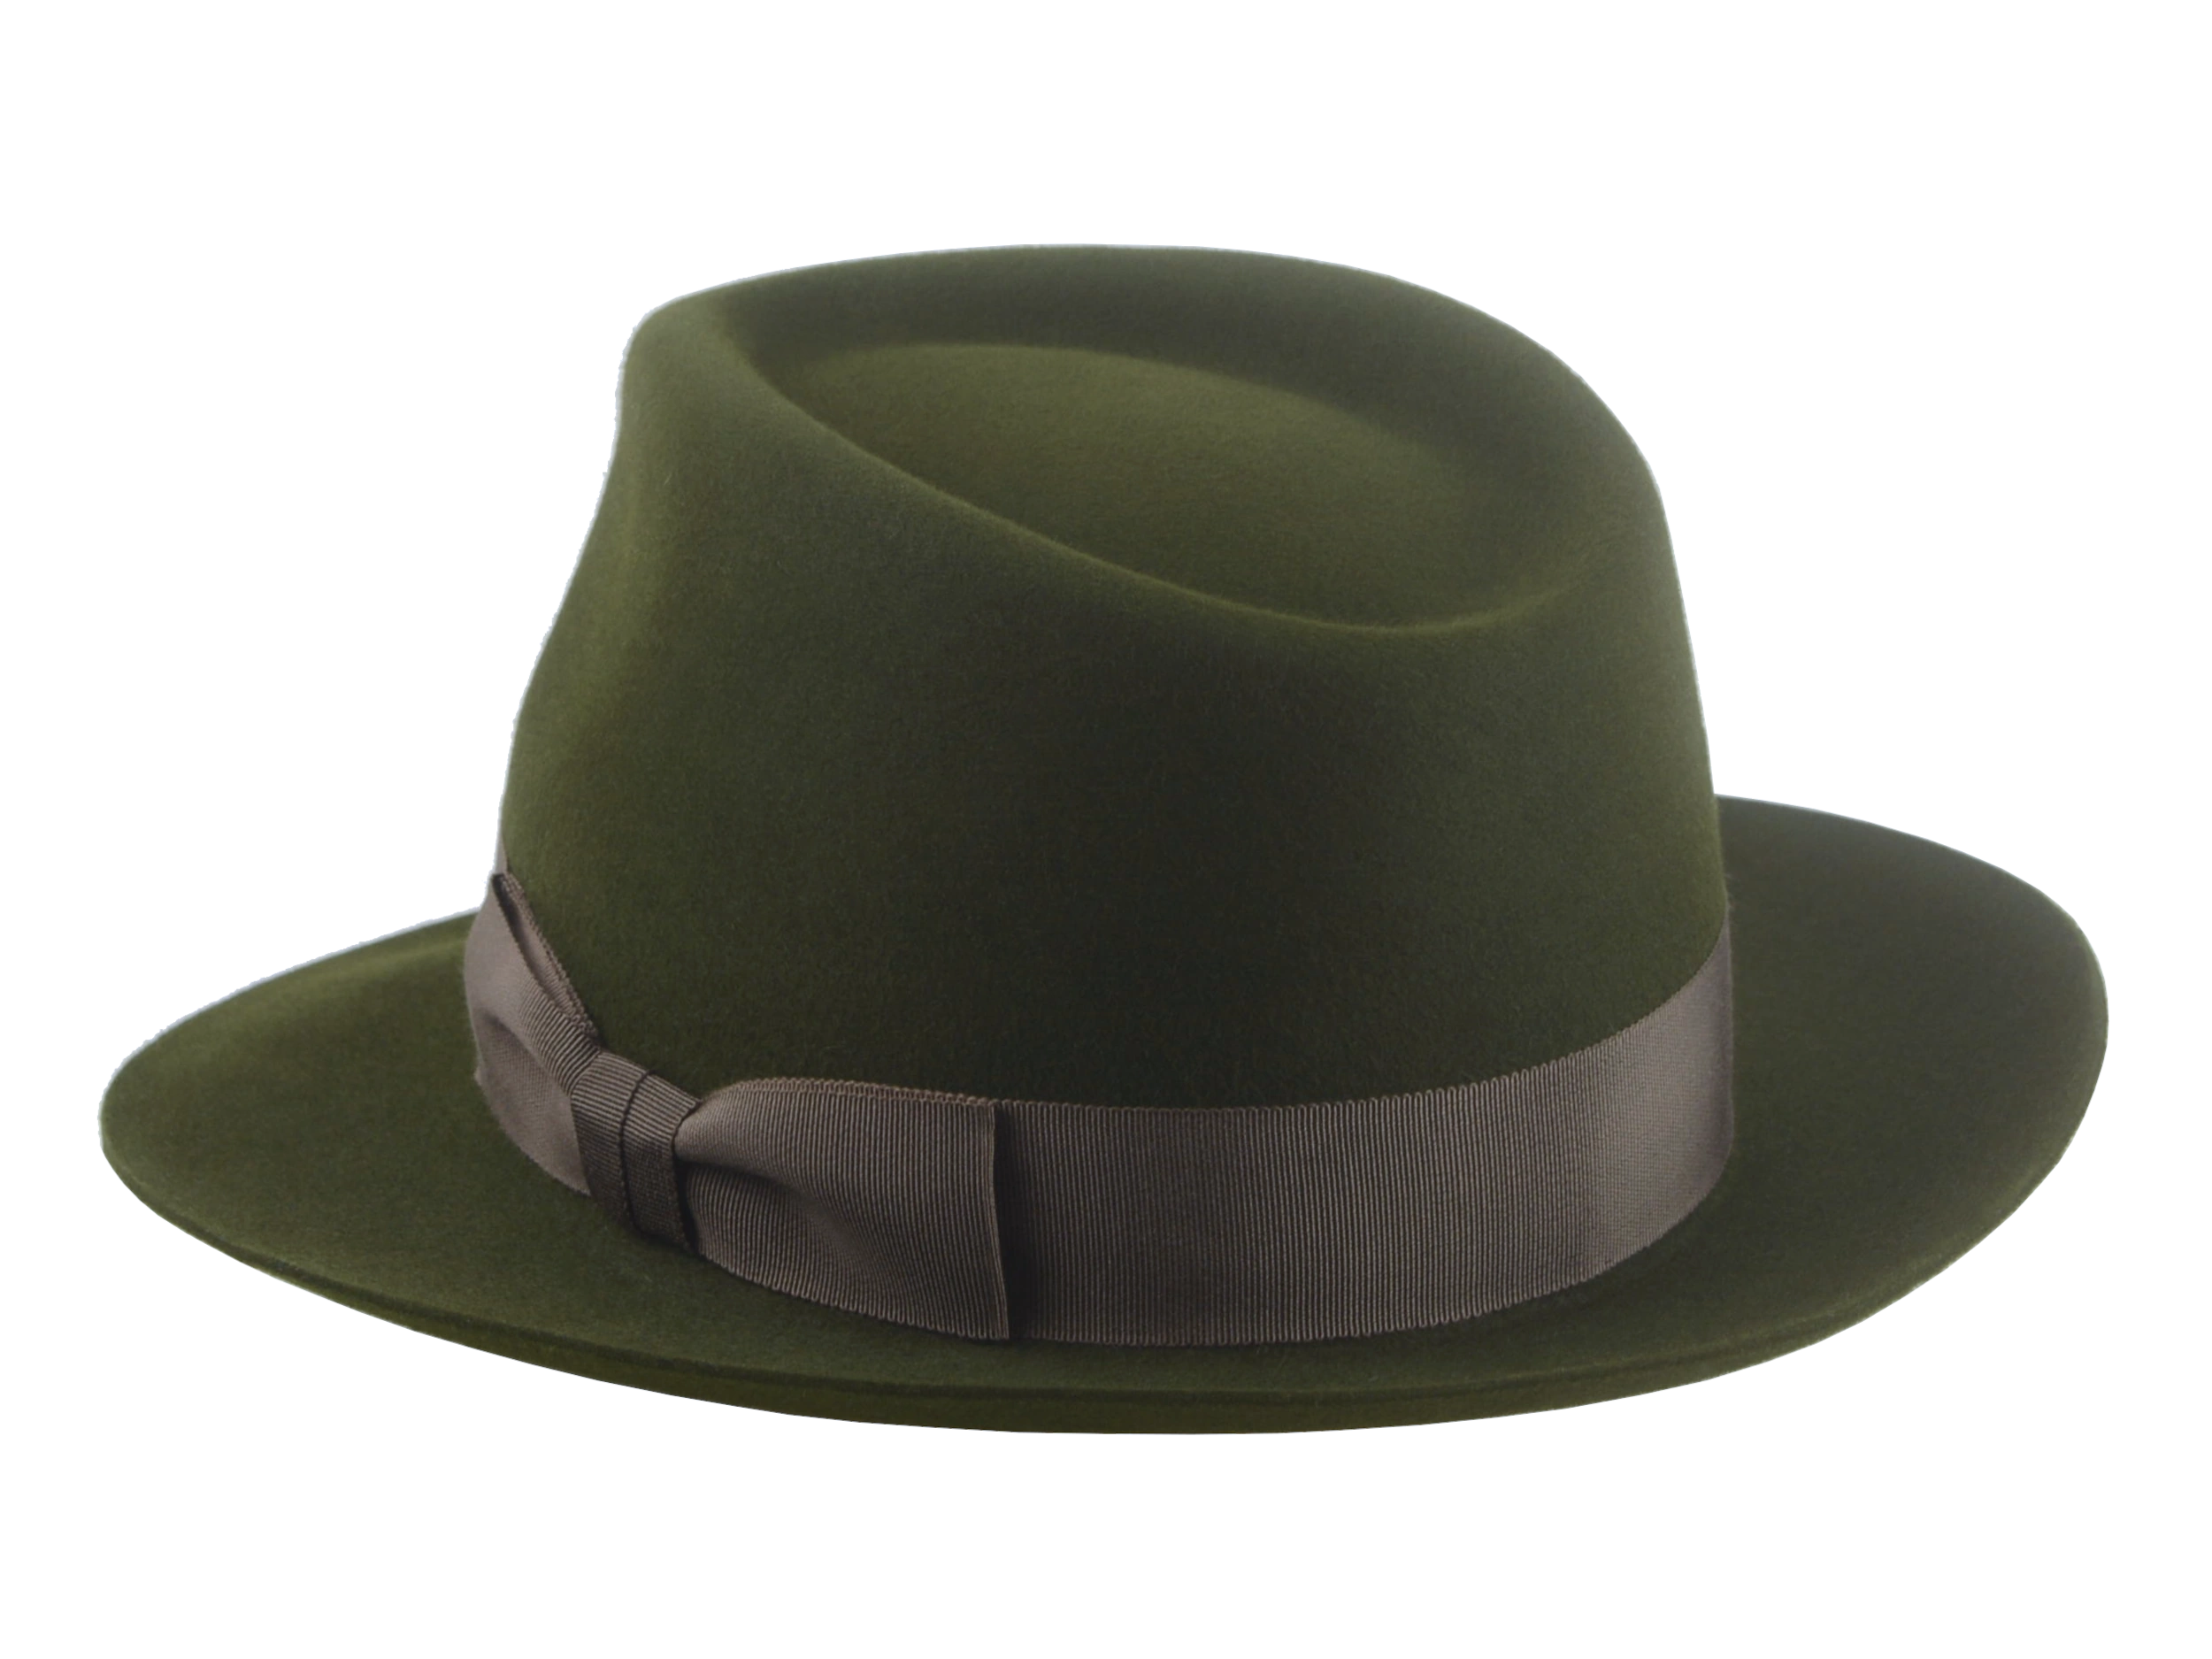 The Hunter fedora from a distance, displaying its elegant silhouette and classic style